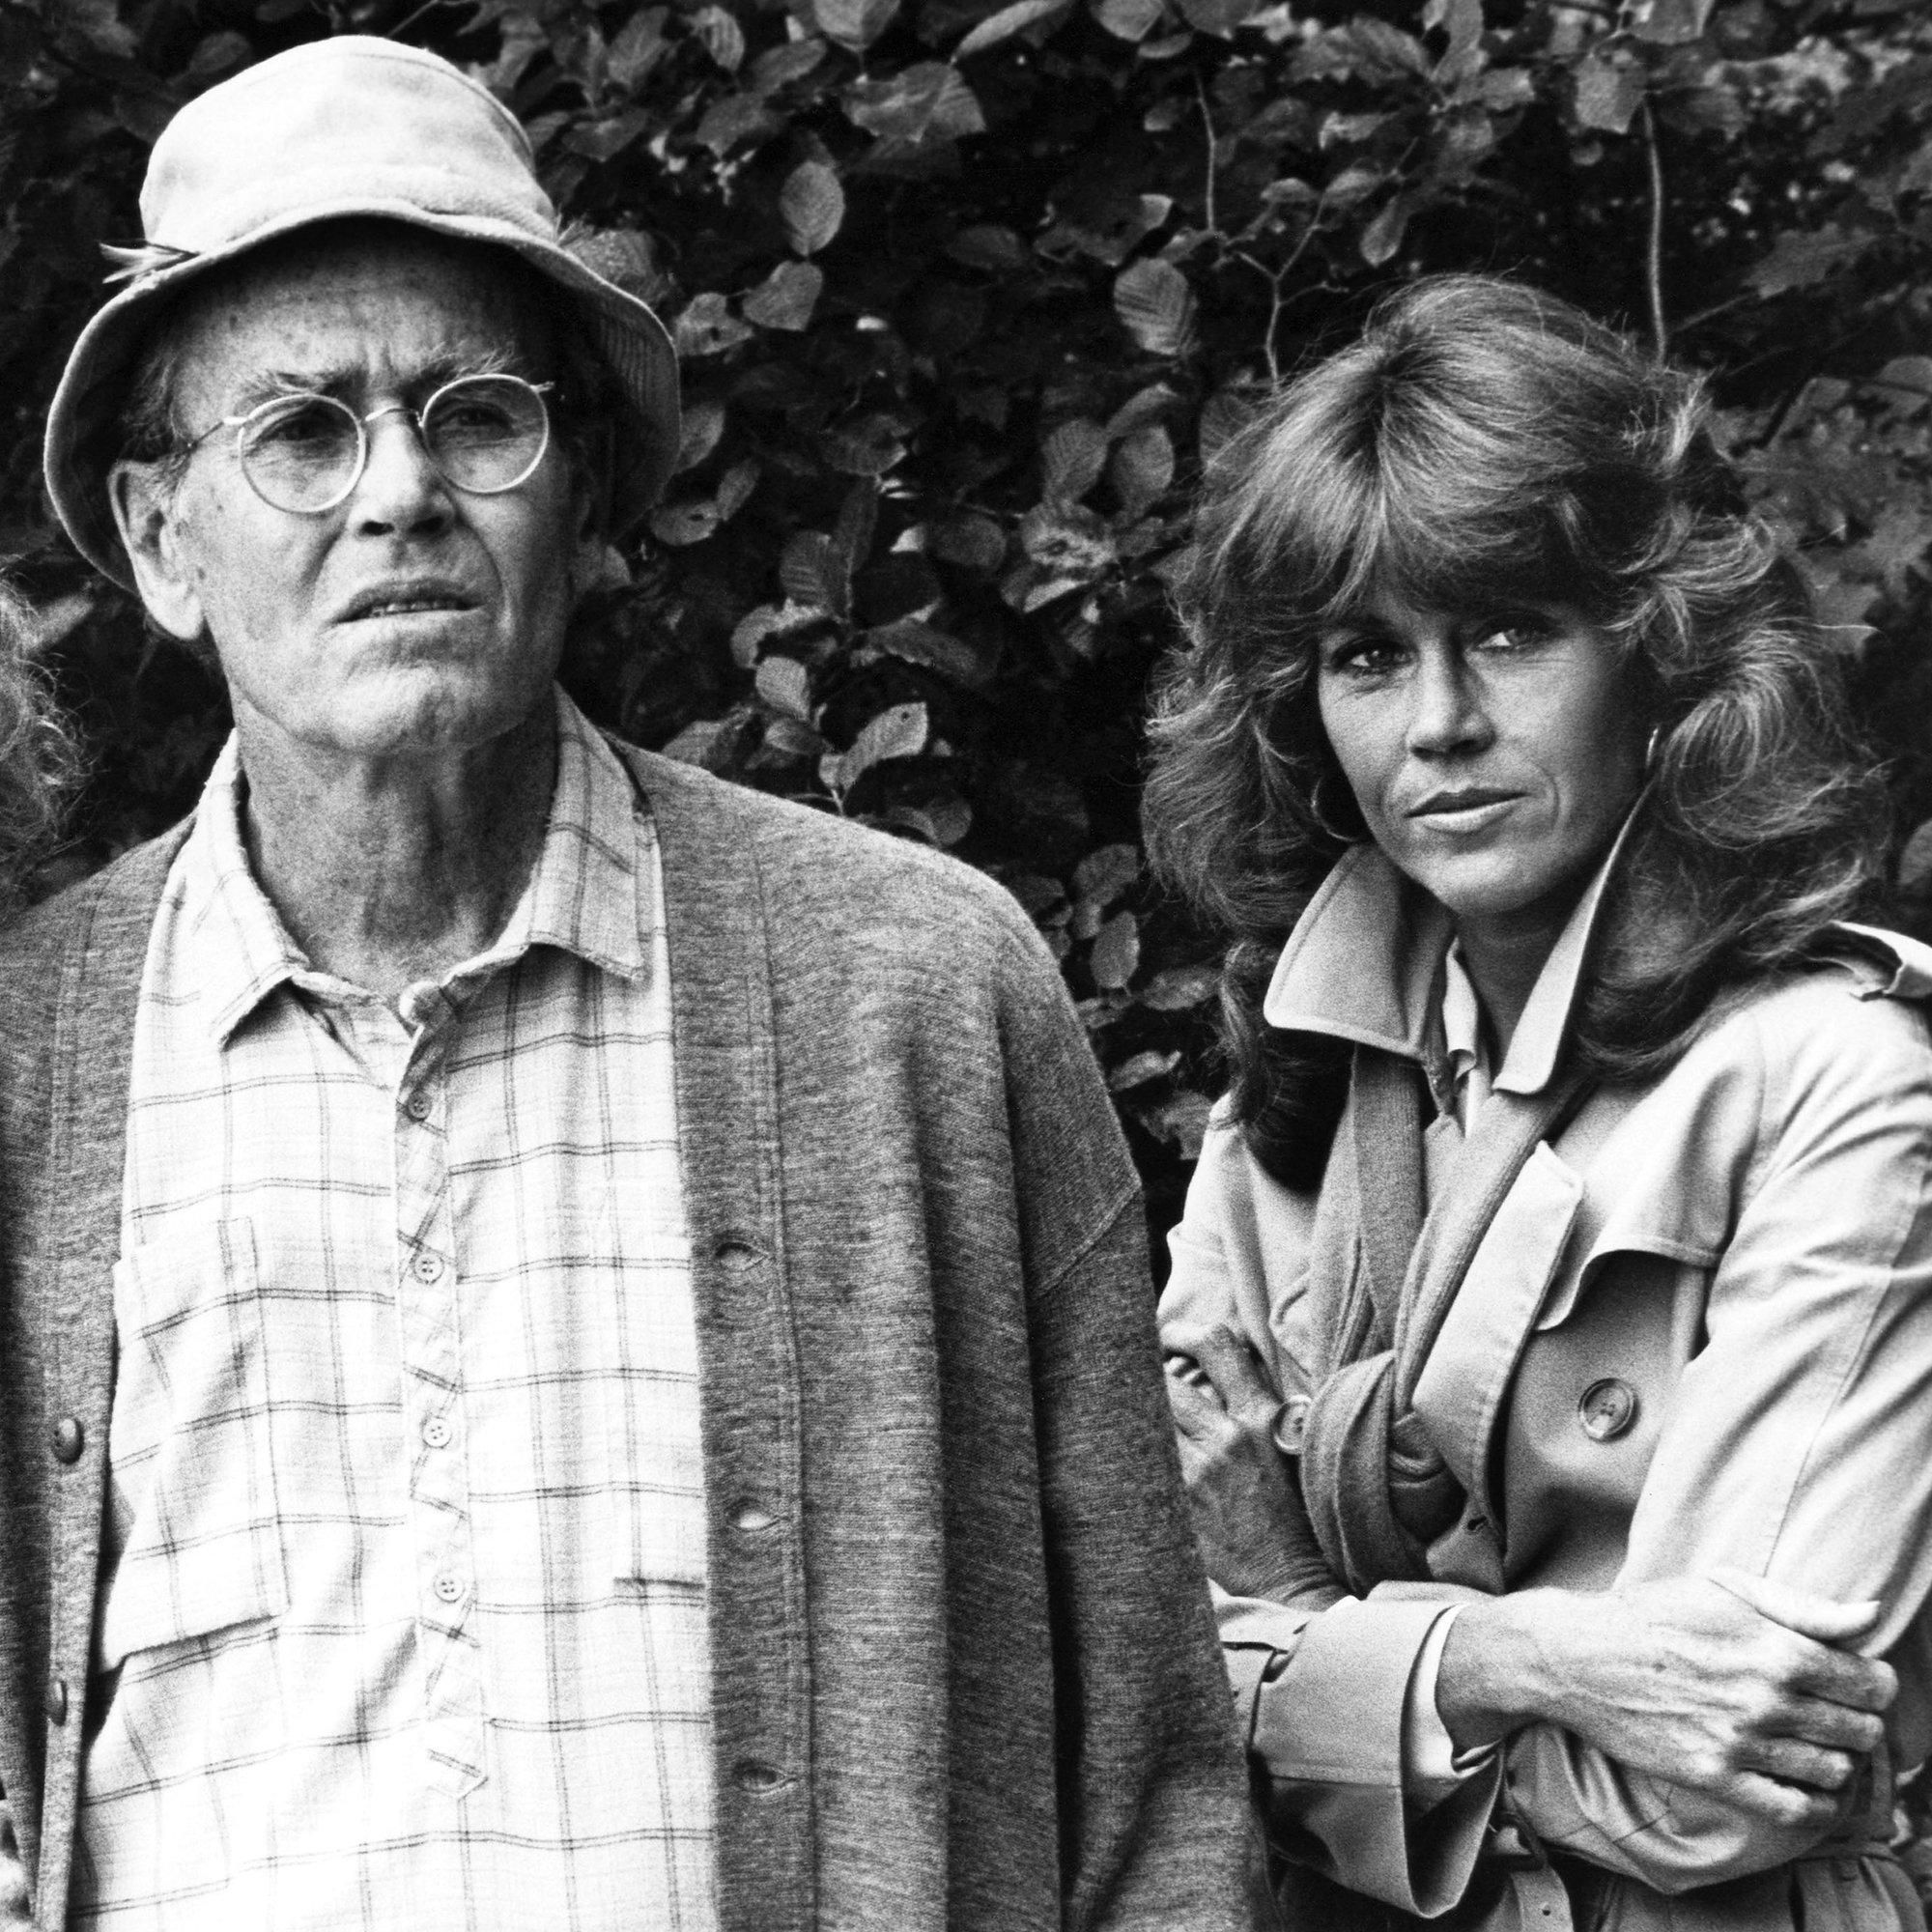 In 1981 Shooting On Golden Pond with father Henry